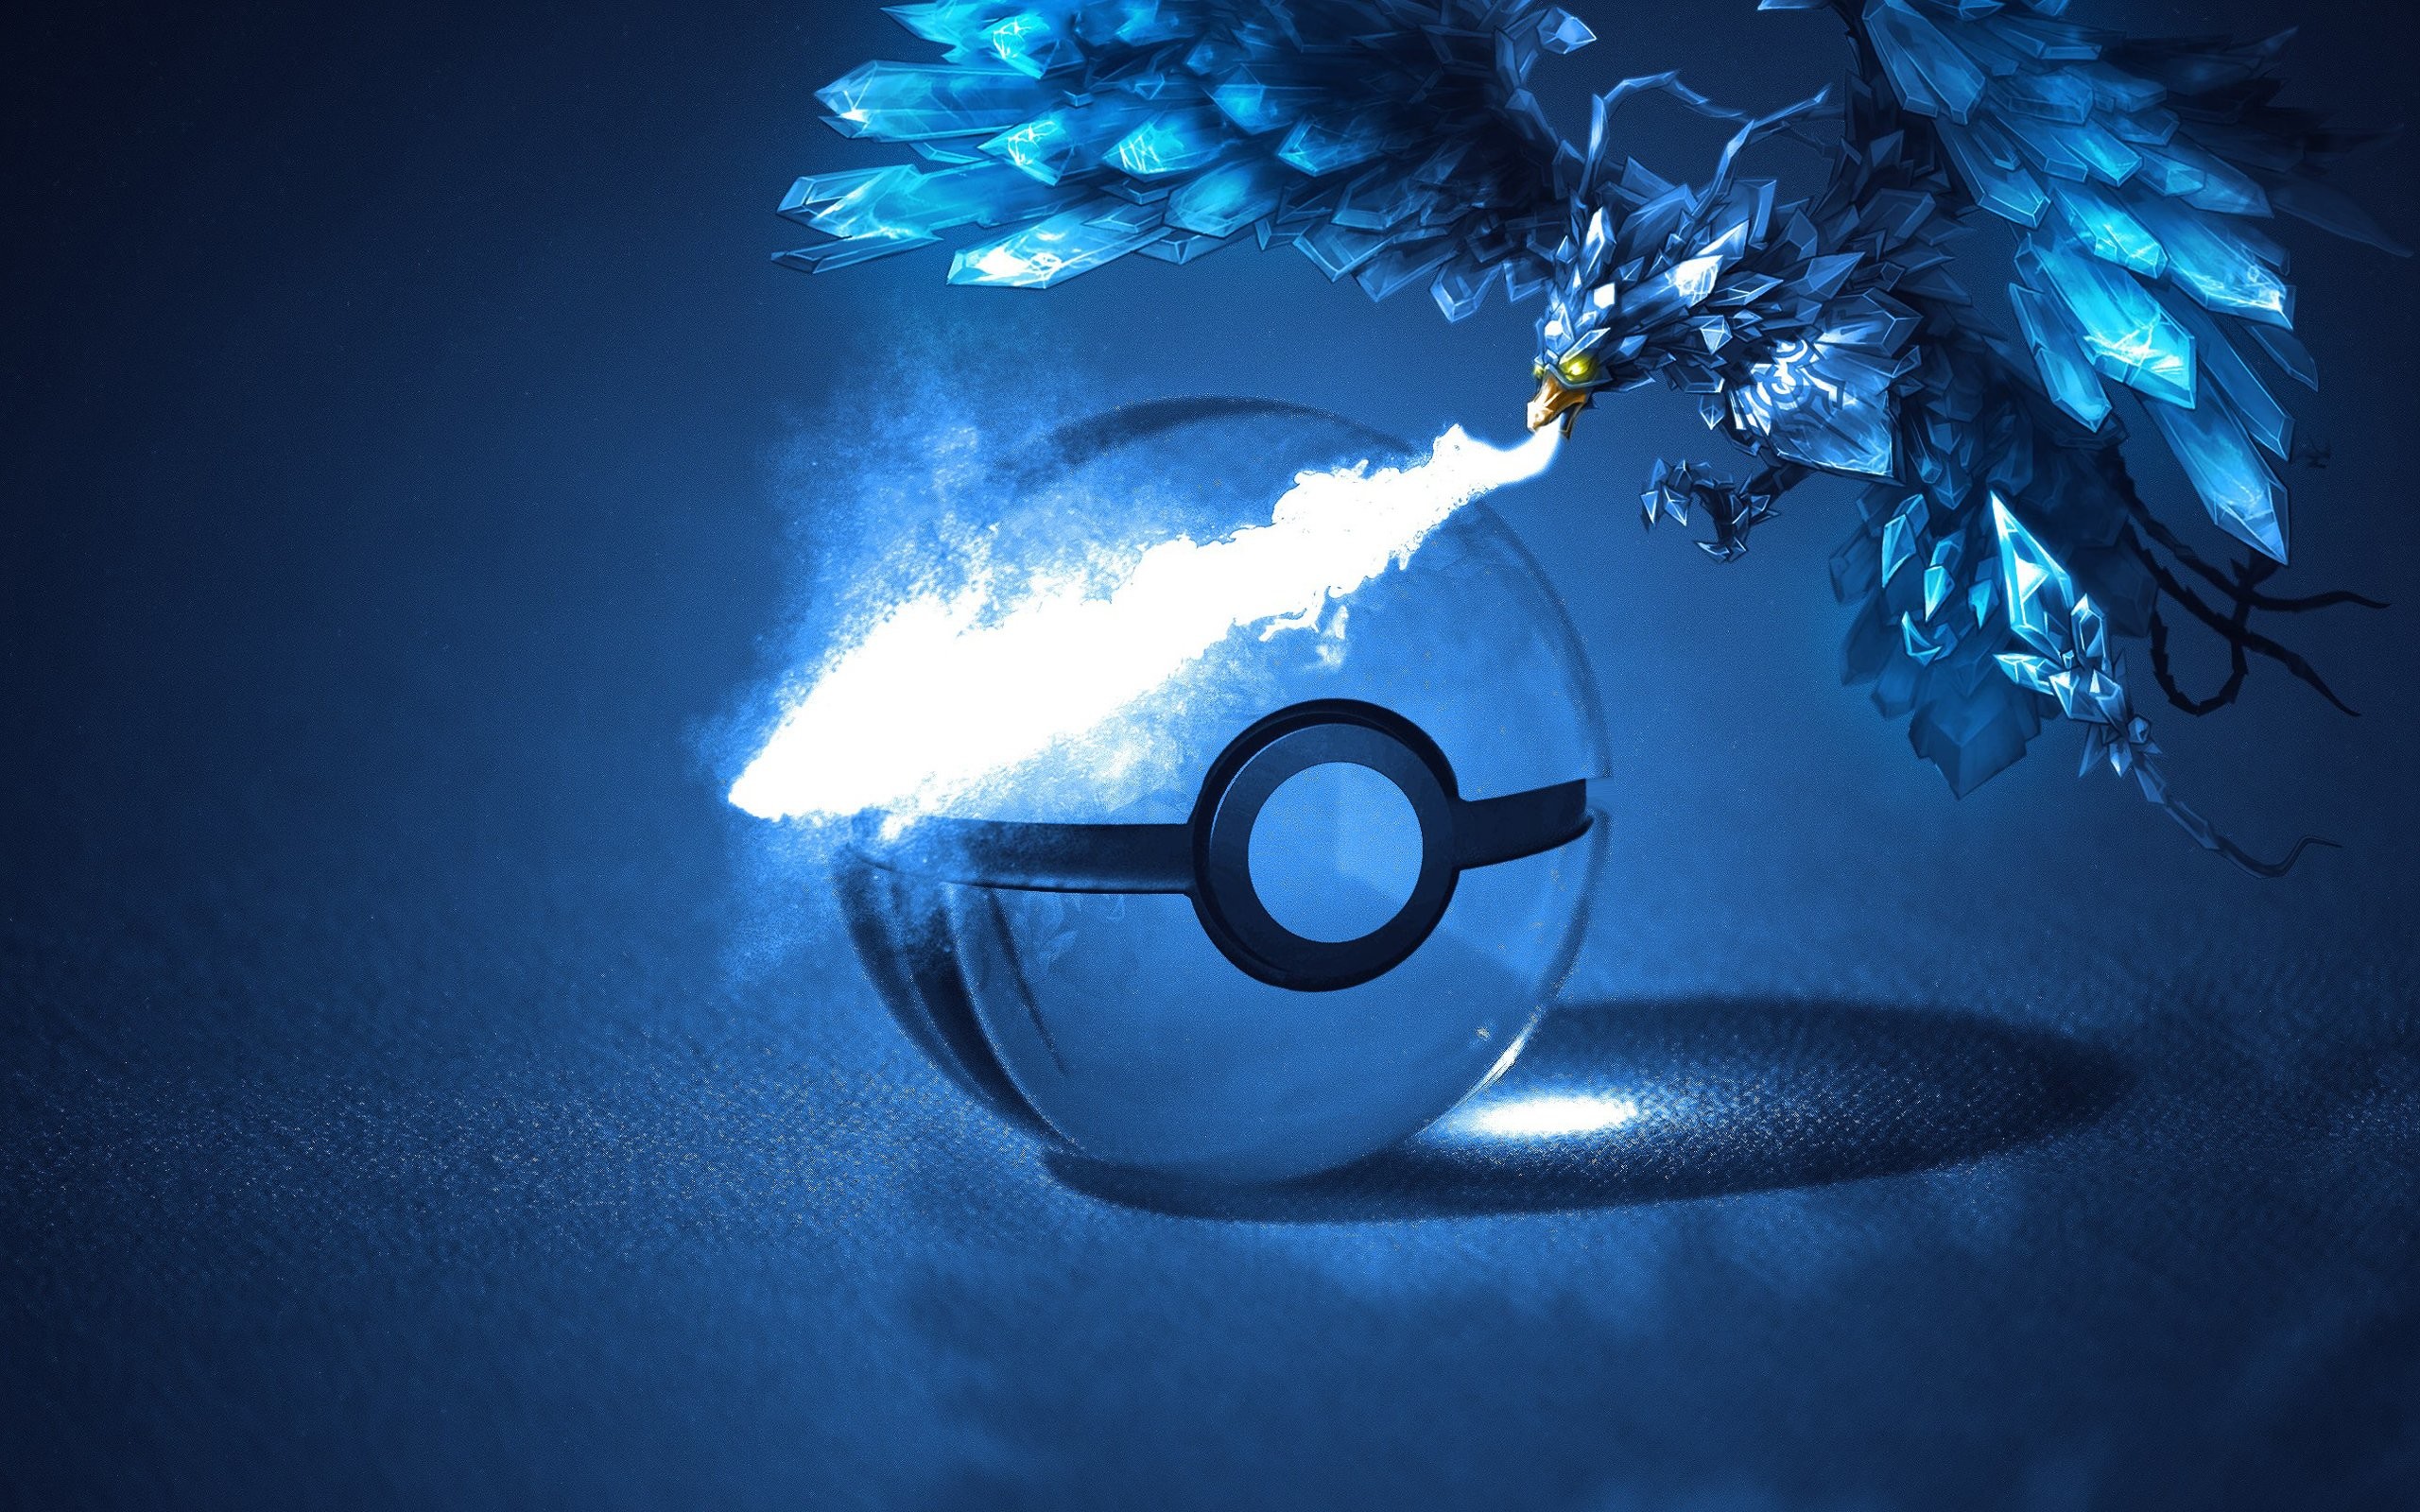 Articuno 565062. SHARE. TAGS: Images Background Christmas Pokemon